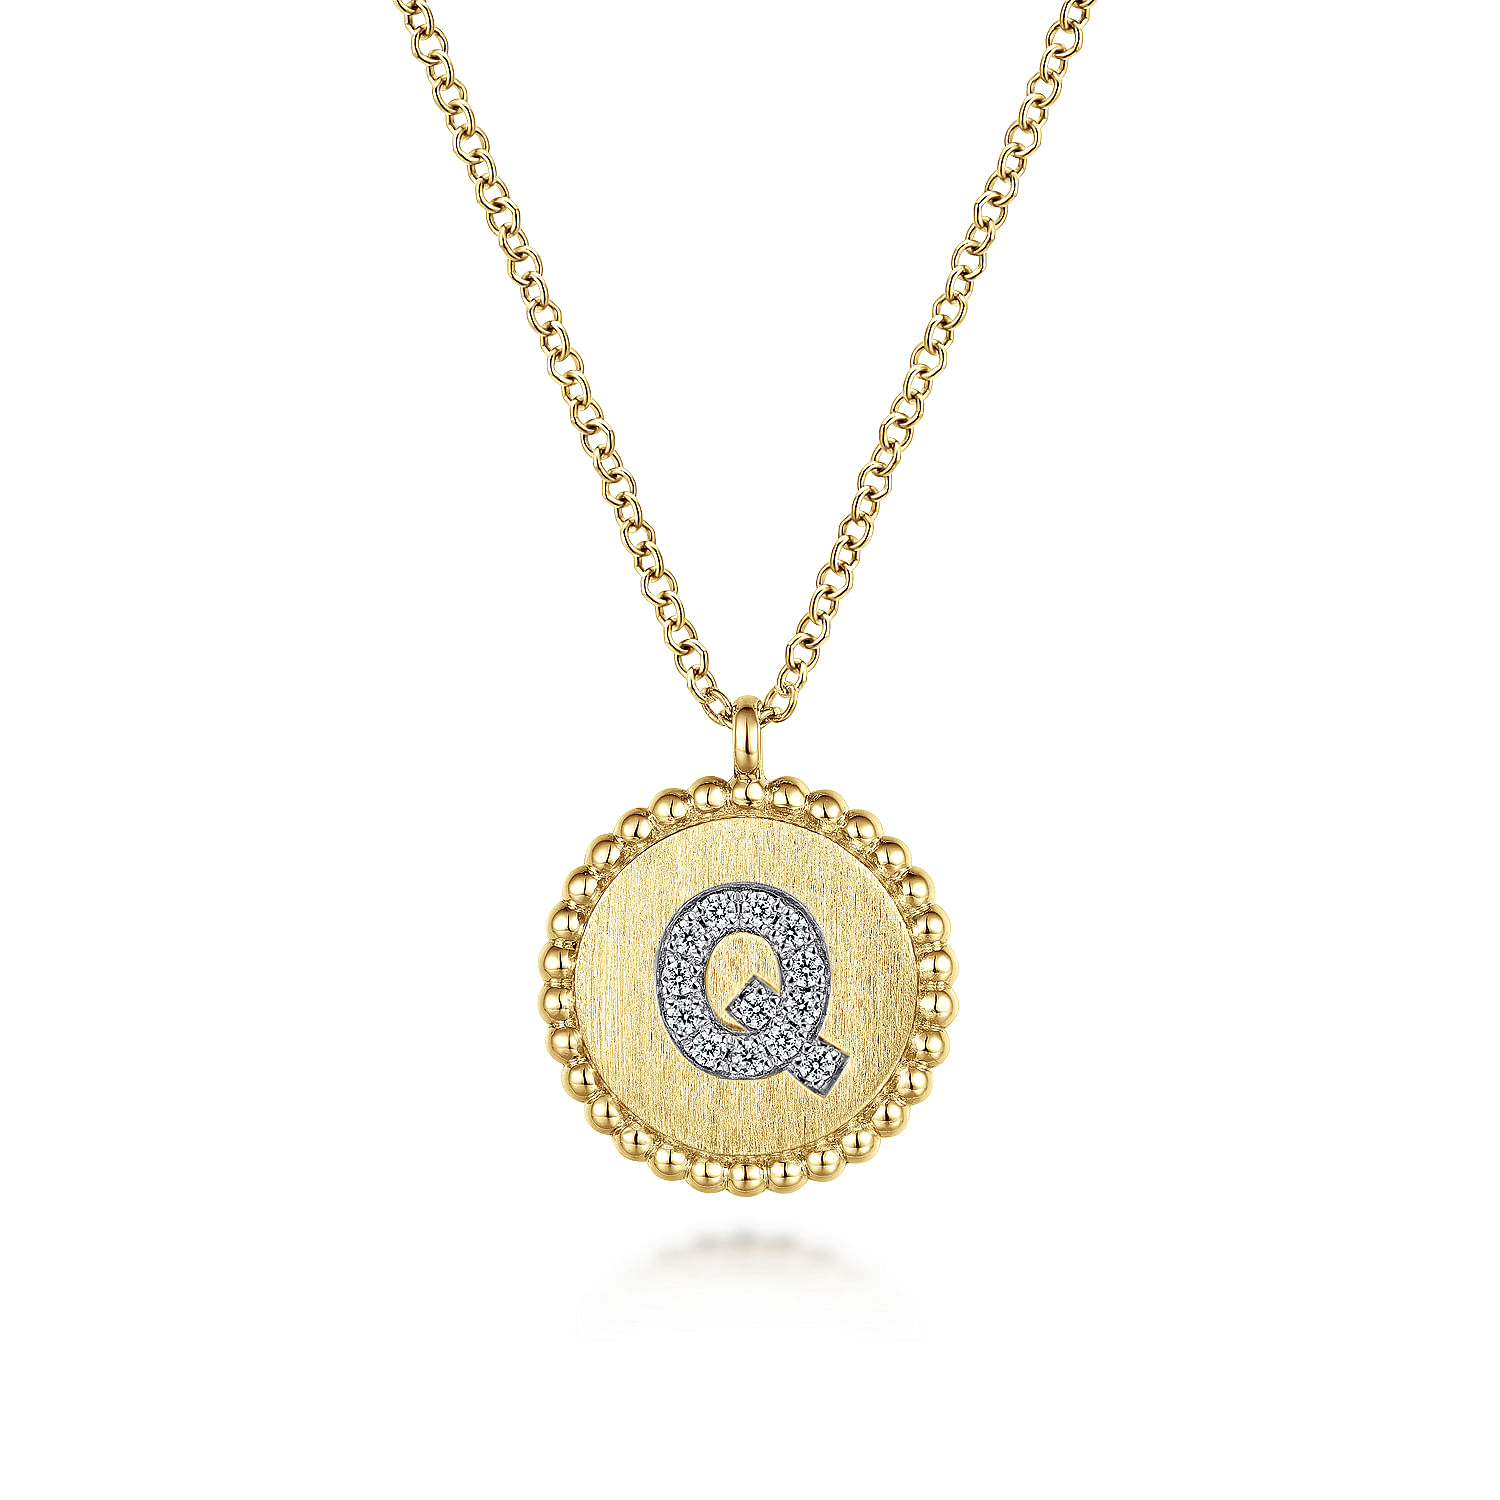 Gabriel - 14K Yellow Gold Round Q Initial Pendant Necklace with Diamonds